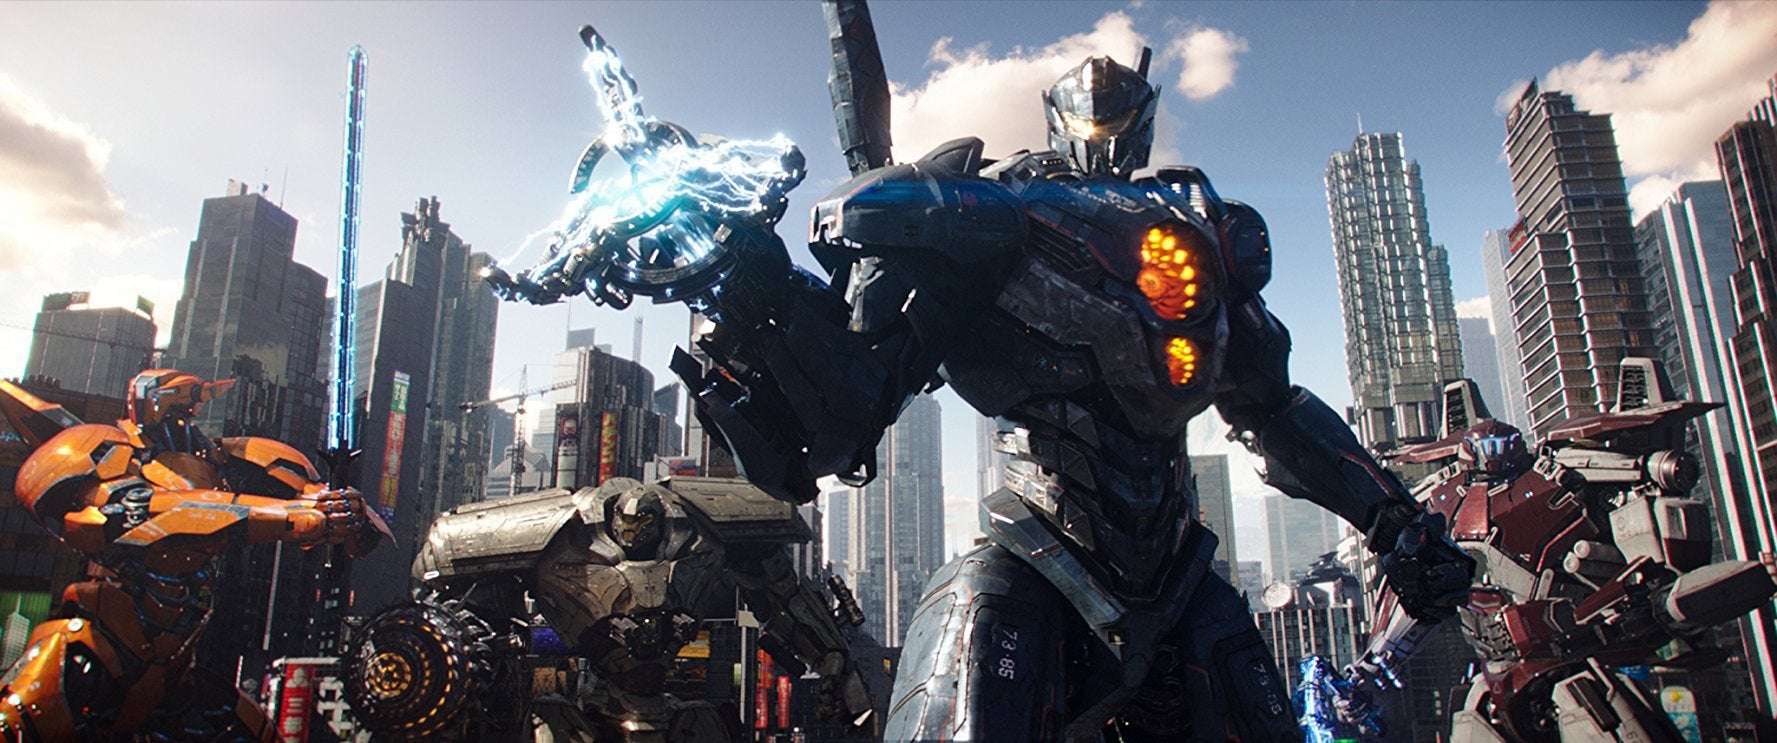 image for ‘Pacific Rim’ Writer Travis Beacham Wanted to Travel to the Other Side of the Rift in Sequels